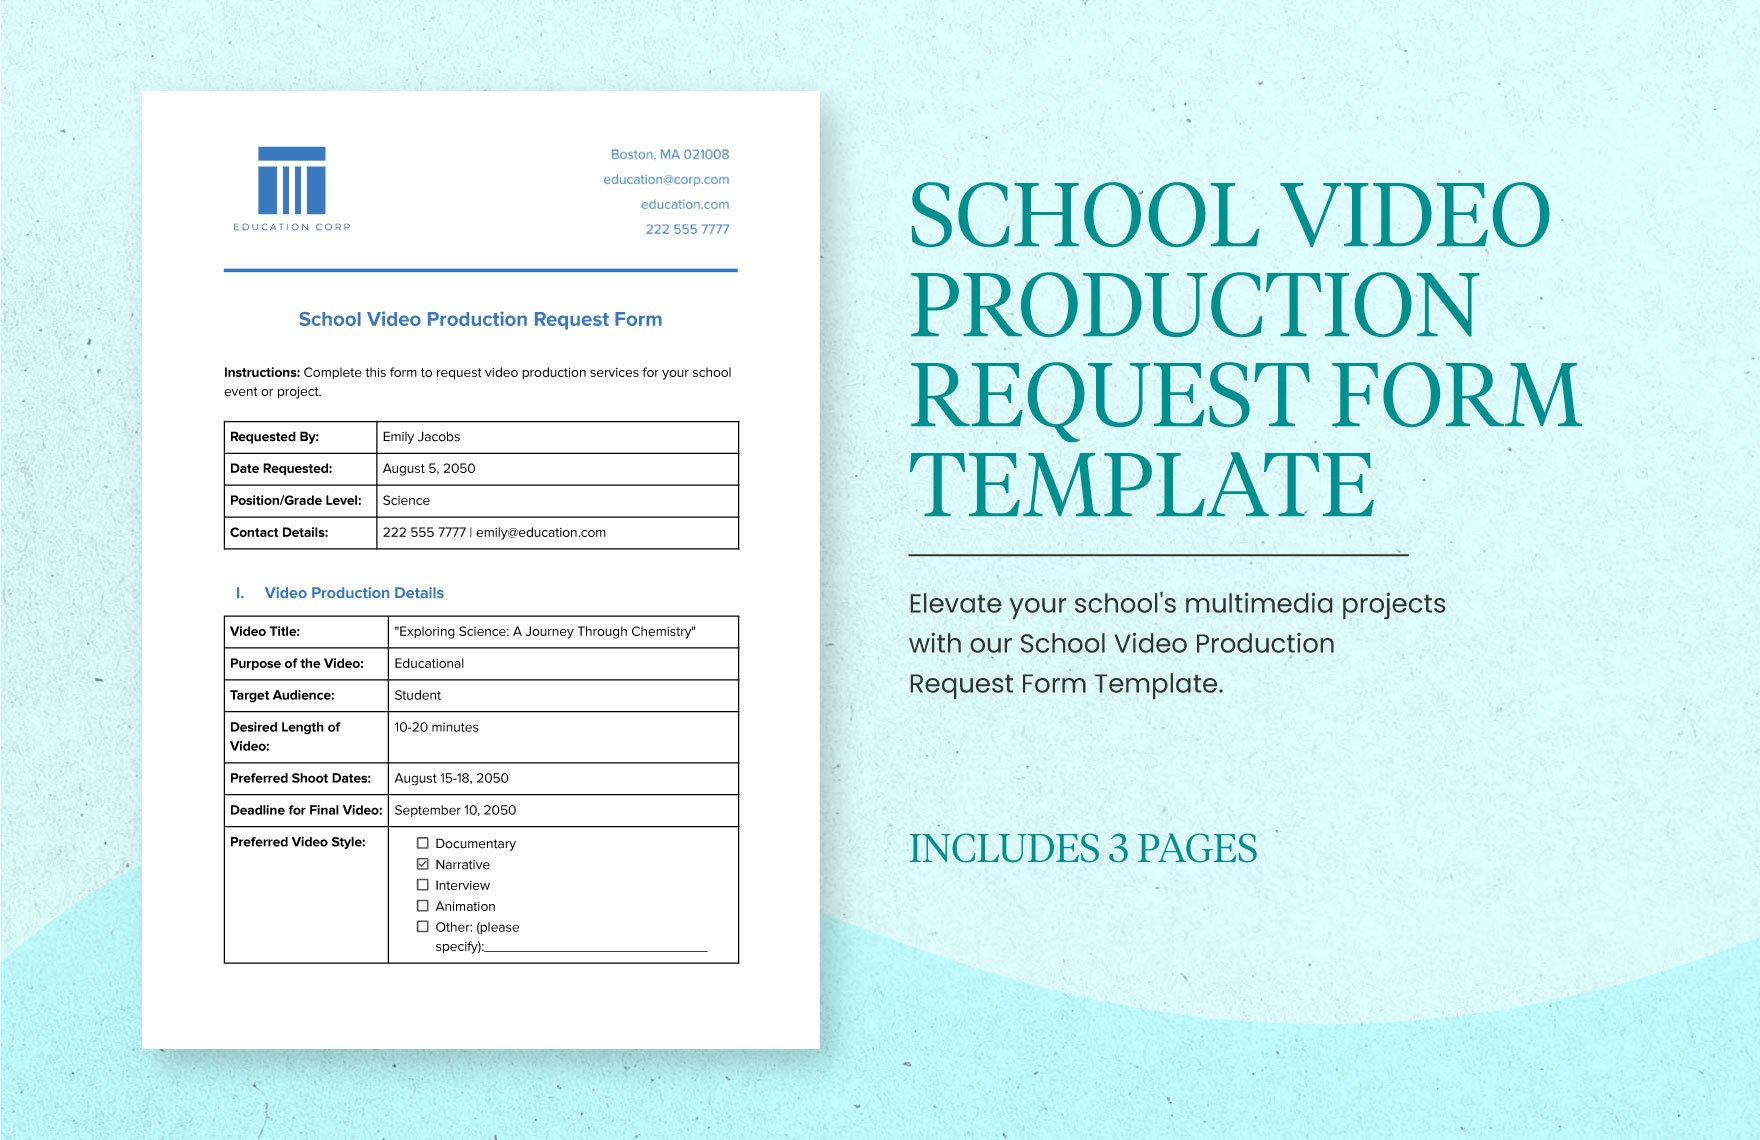 School Video Production Request Form Template in Word, Google Docs, PDF